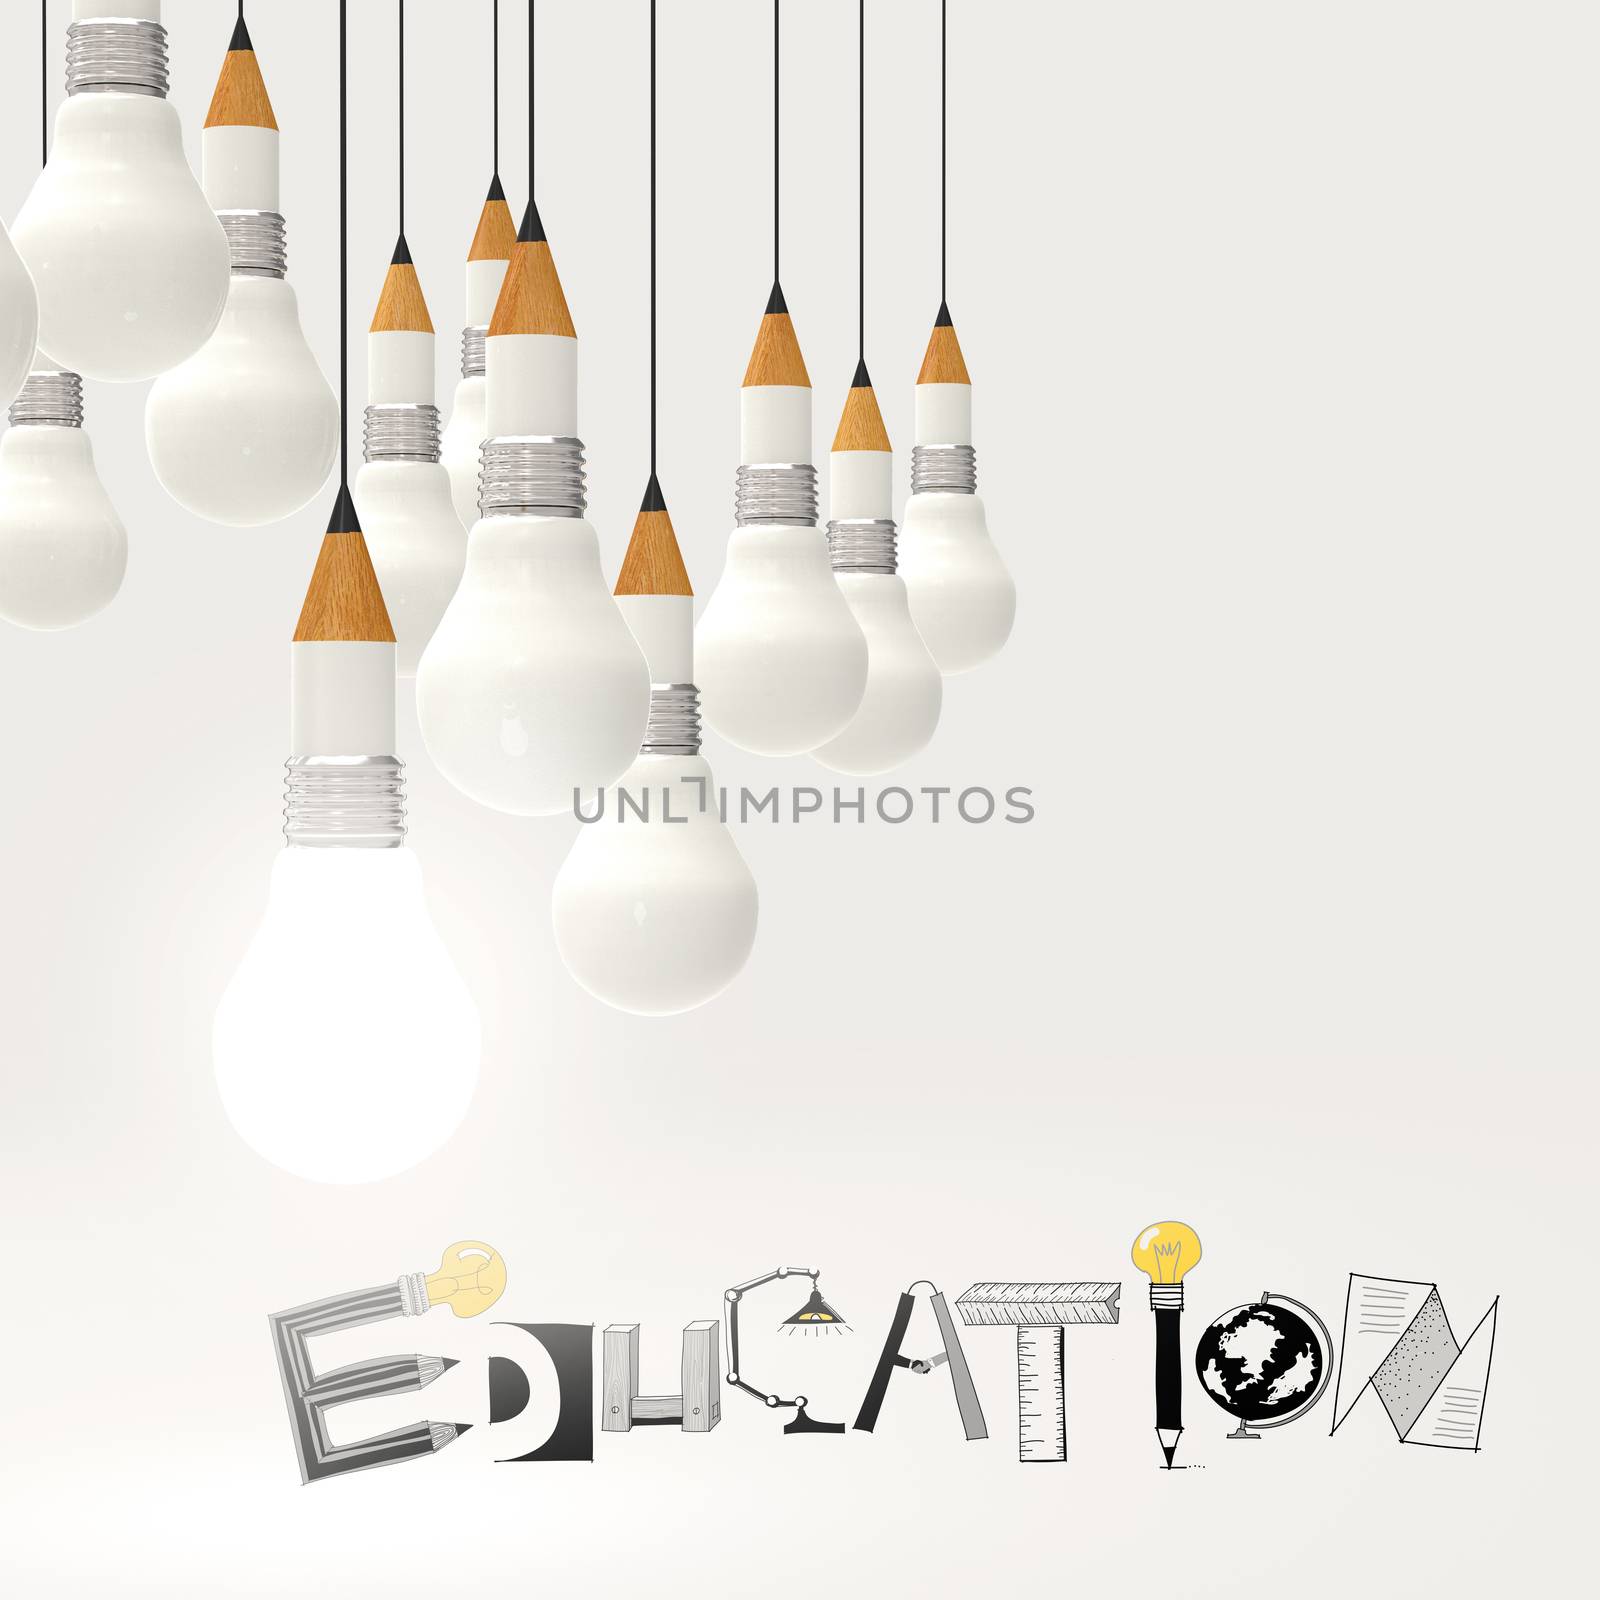 pencil lightbulb 3d and design word EDUCATION as concept